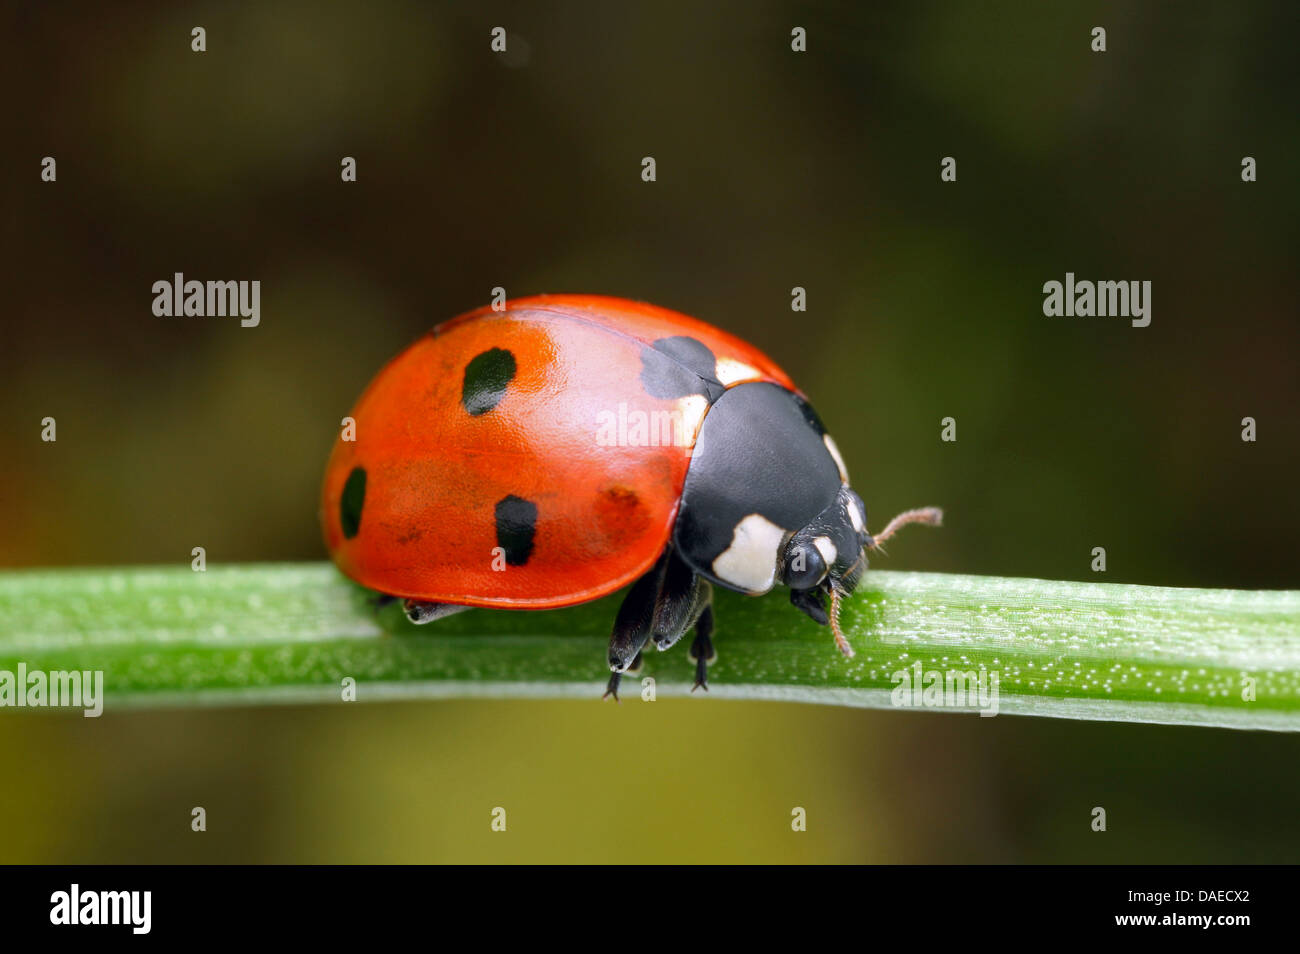 seven-spot ladybird, sevenspot ladybird, 7-spot ladybird (Coccinella septempunctata), sitting on a sprout, Germany, Thuringia Stock Photo